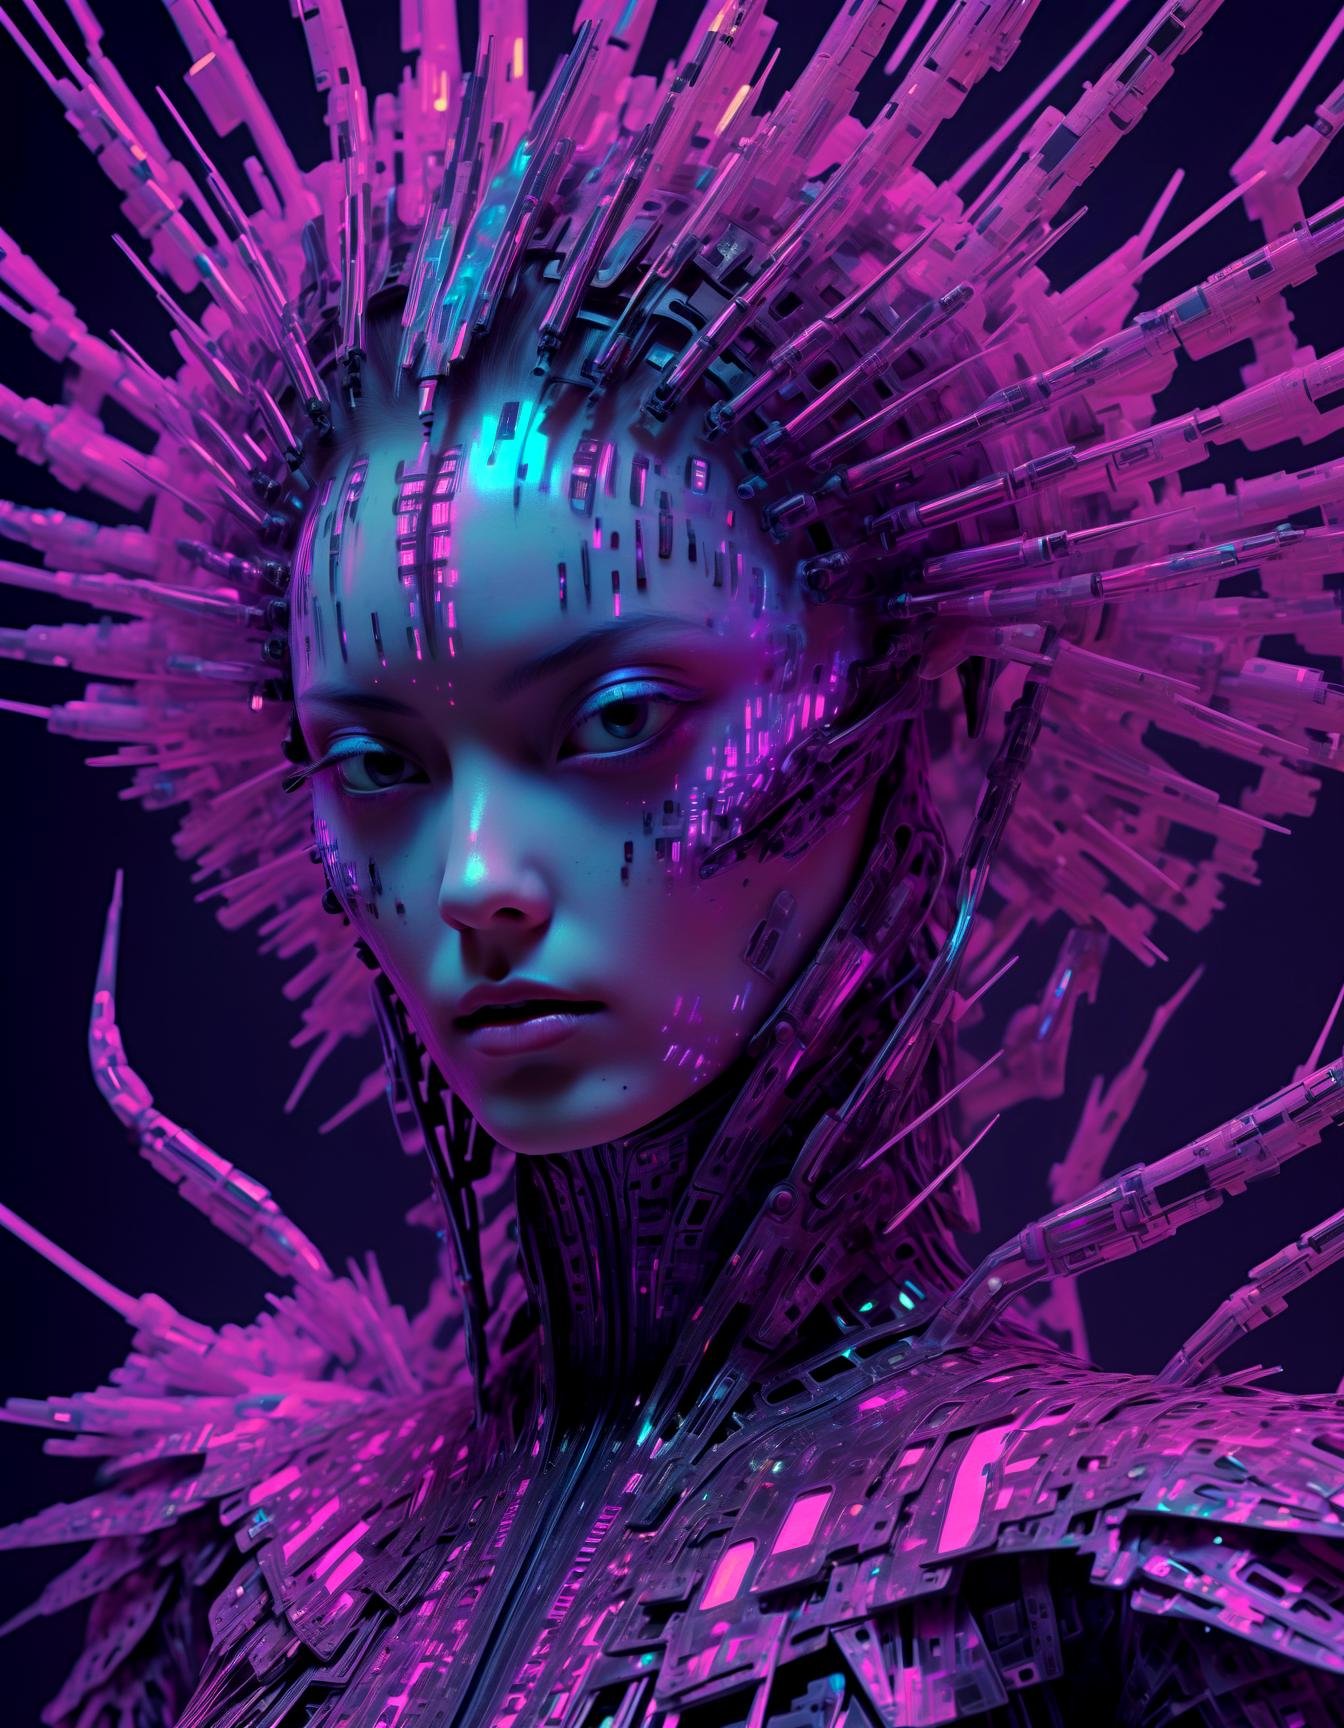 close up portrait Fluorescent geometric shadows, pulsating fractals, glitched reality, bio-luminescent haute couture, cybernetic terror chic, Vogue of Virtual Horrors, surreal cyberpunk cityscape engulfed in neon hues.,detailed, ,